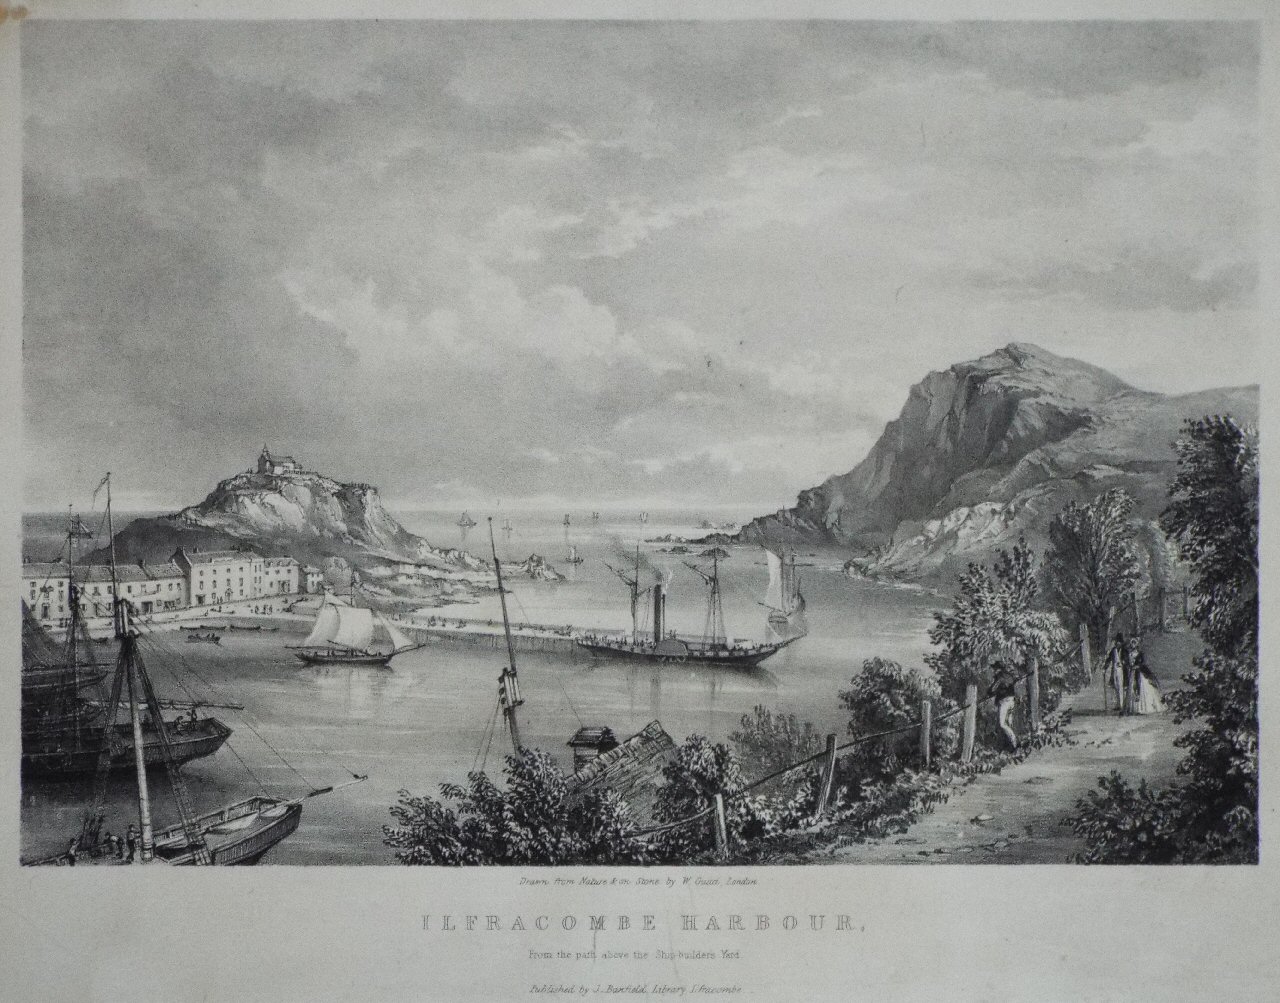 Lithograph - Ilfracombe Harbour, From the Path above the Ship-builders Yard. - Gauci